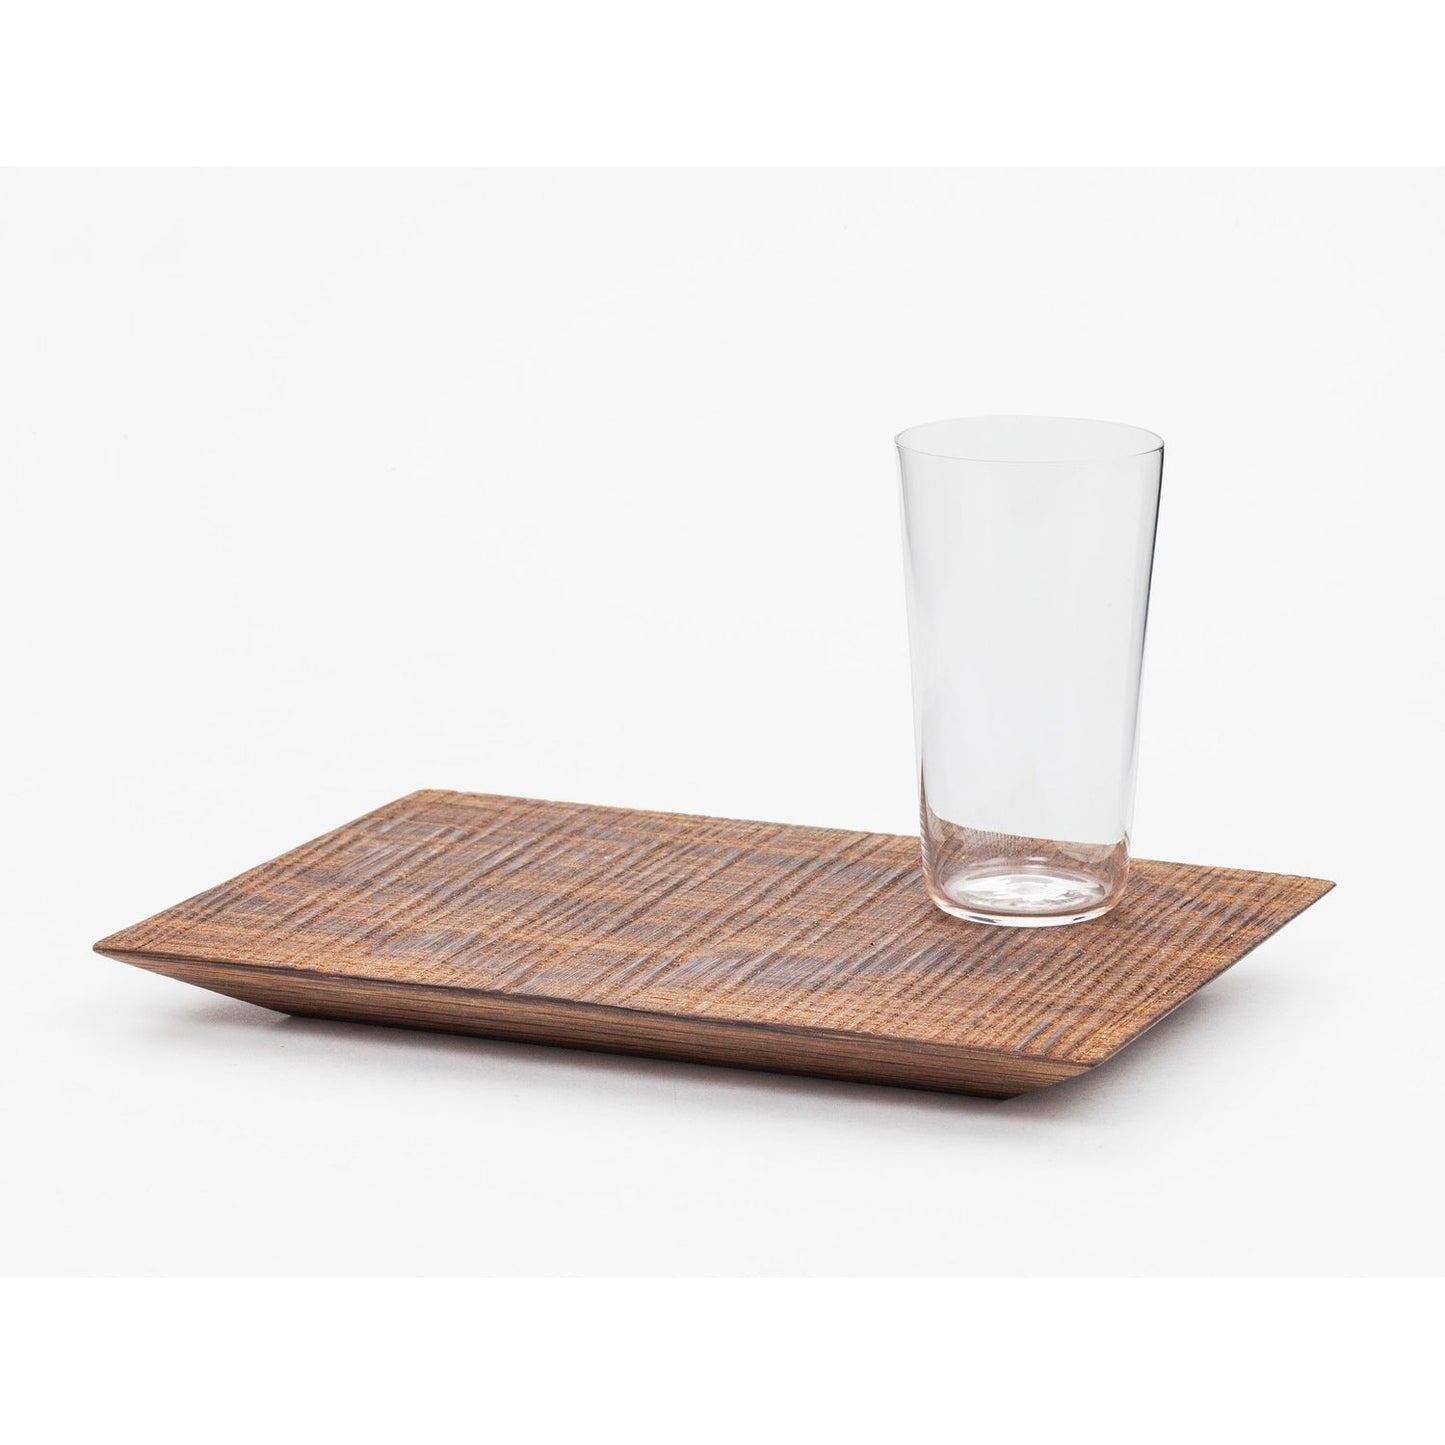 Sawn serving plate プレート